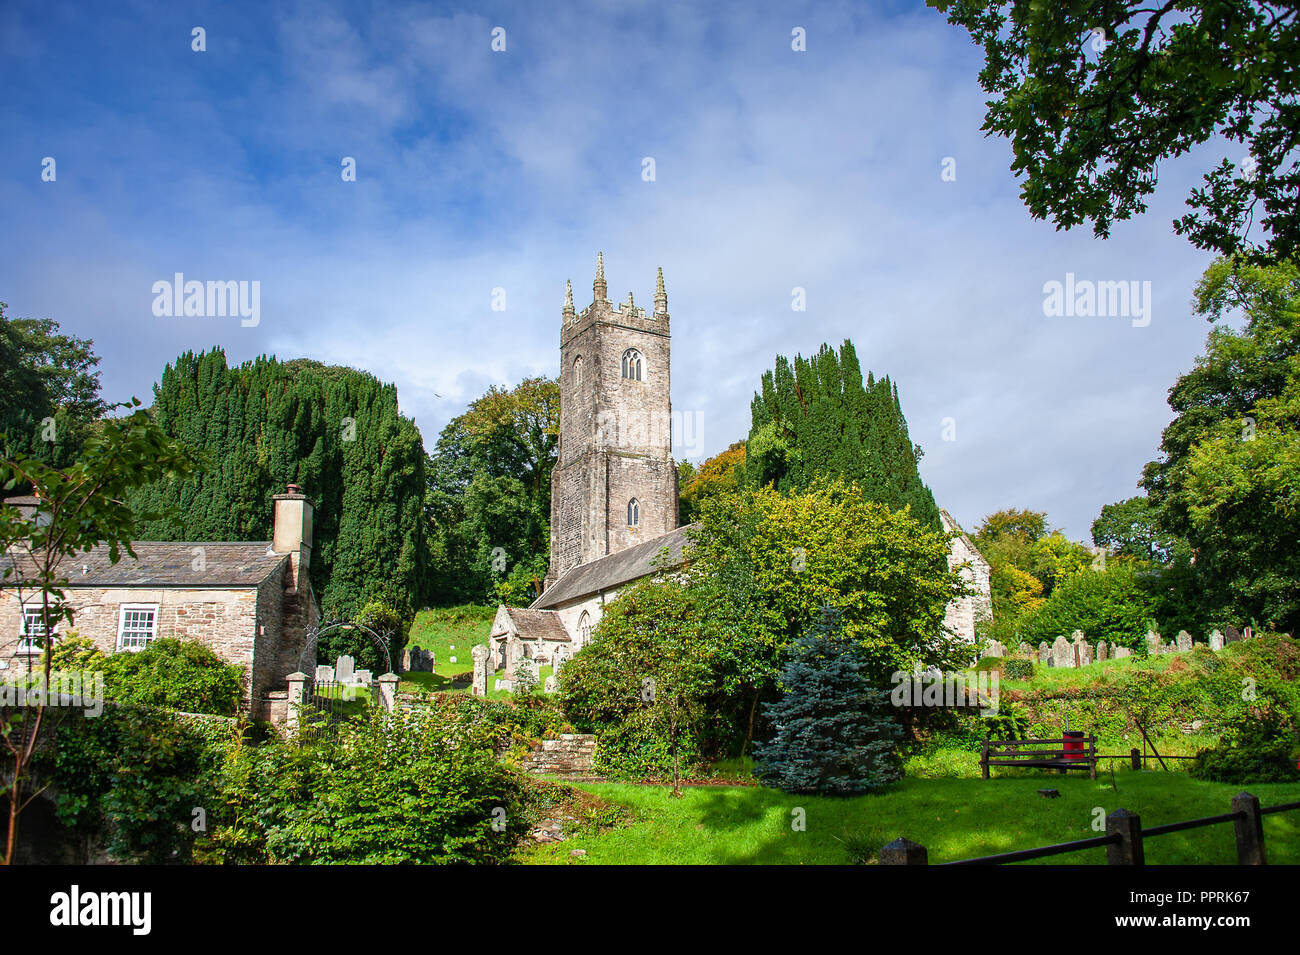 Picturesque Church of St Nonna, or Cathedral on the Moor at Altarnun, near Bodmin, Cornwall. Beautiful Norman building, in a green, grassy churchyard Stock Photo